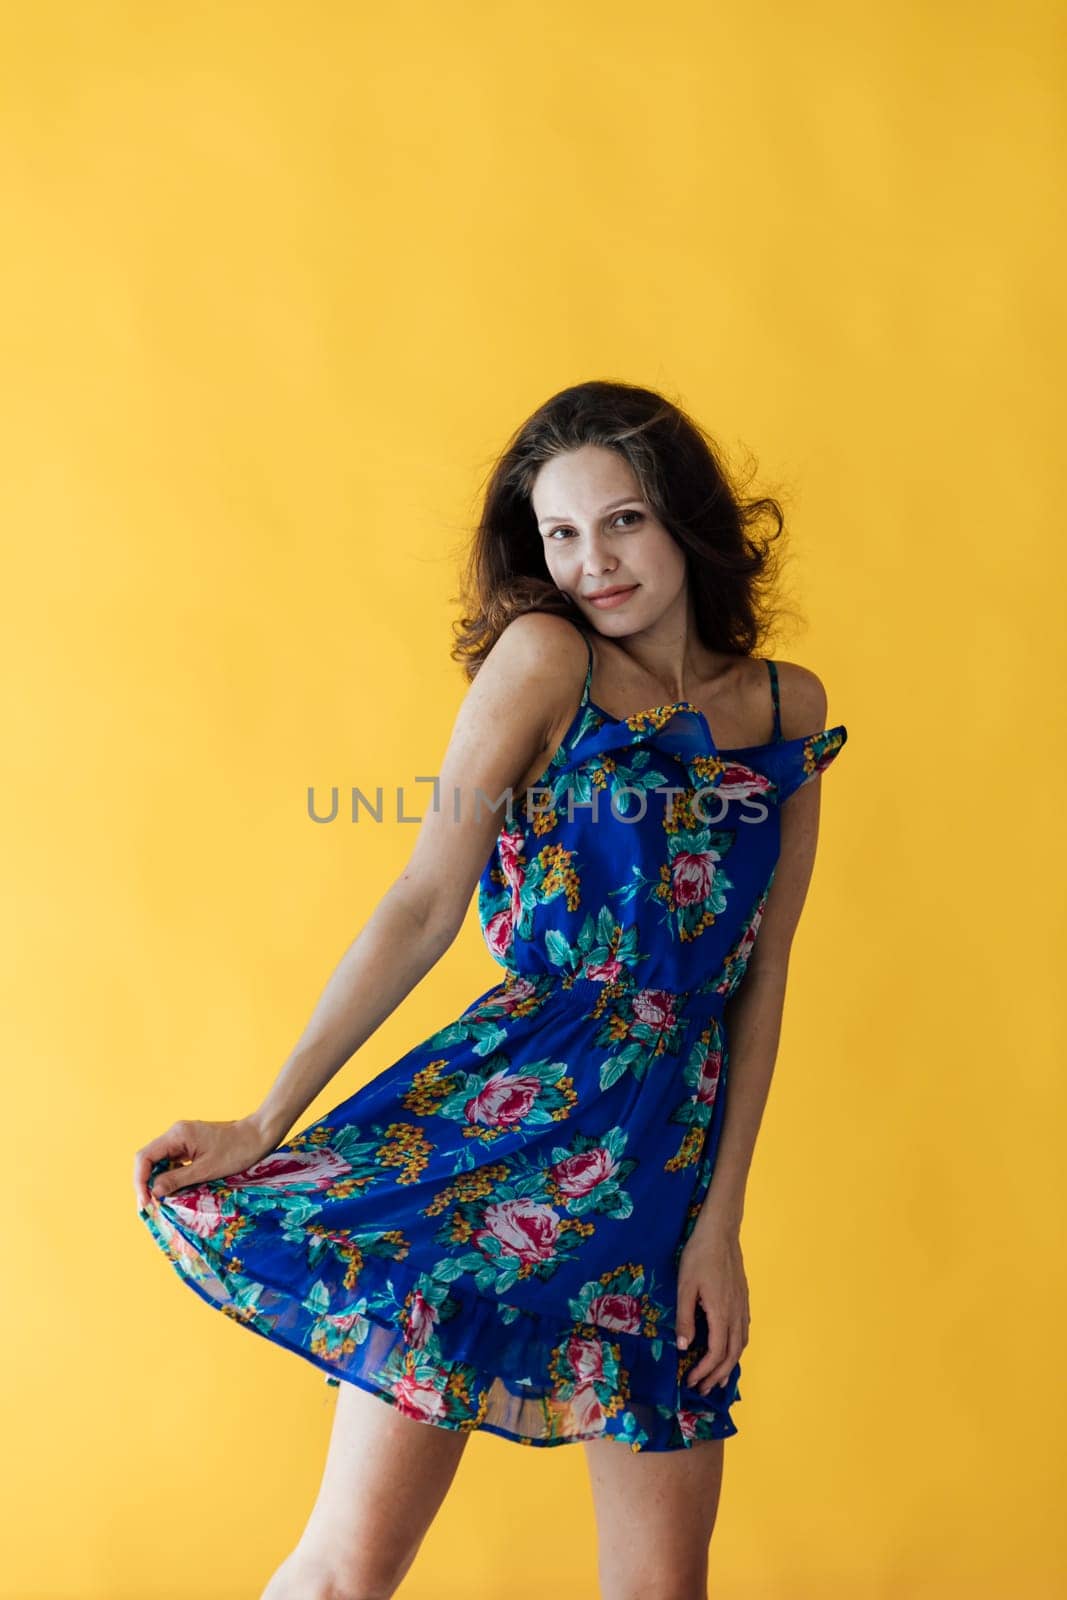 cheerful woman in a blue floral dress on a yellow background by Simakov